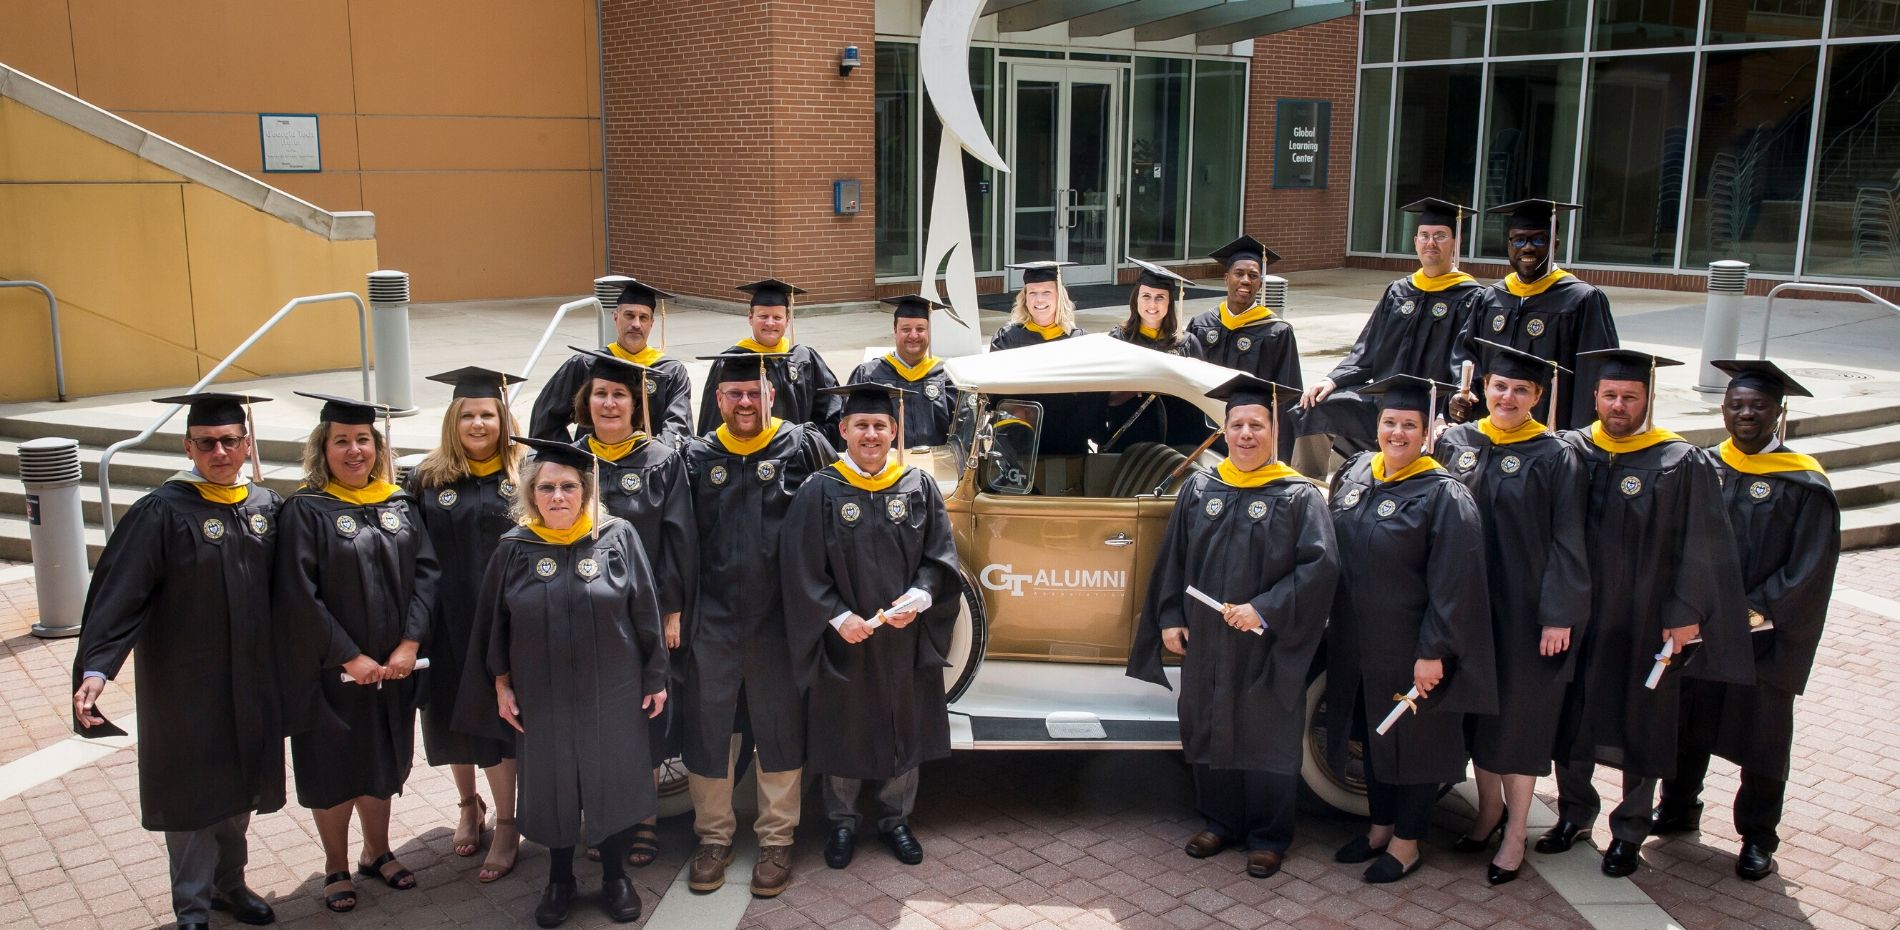 Professional Master's in Occupational Safety and Health graduates stand in front of the Ramblin' Wreck in their caps and gowns.